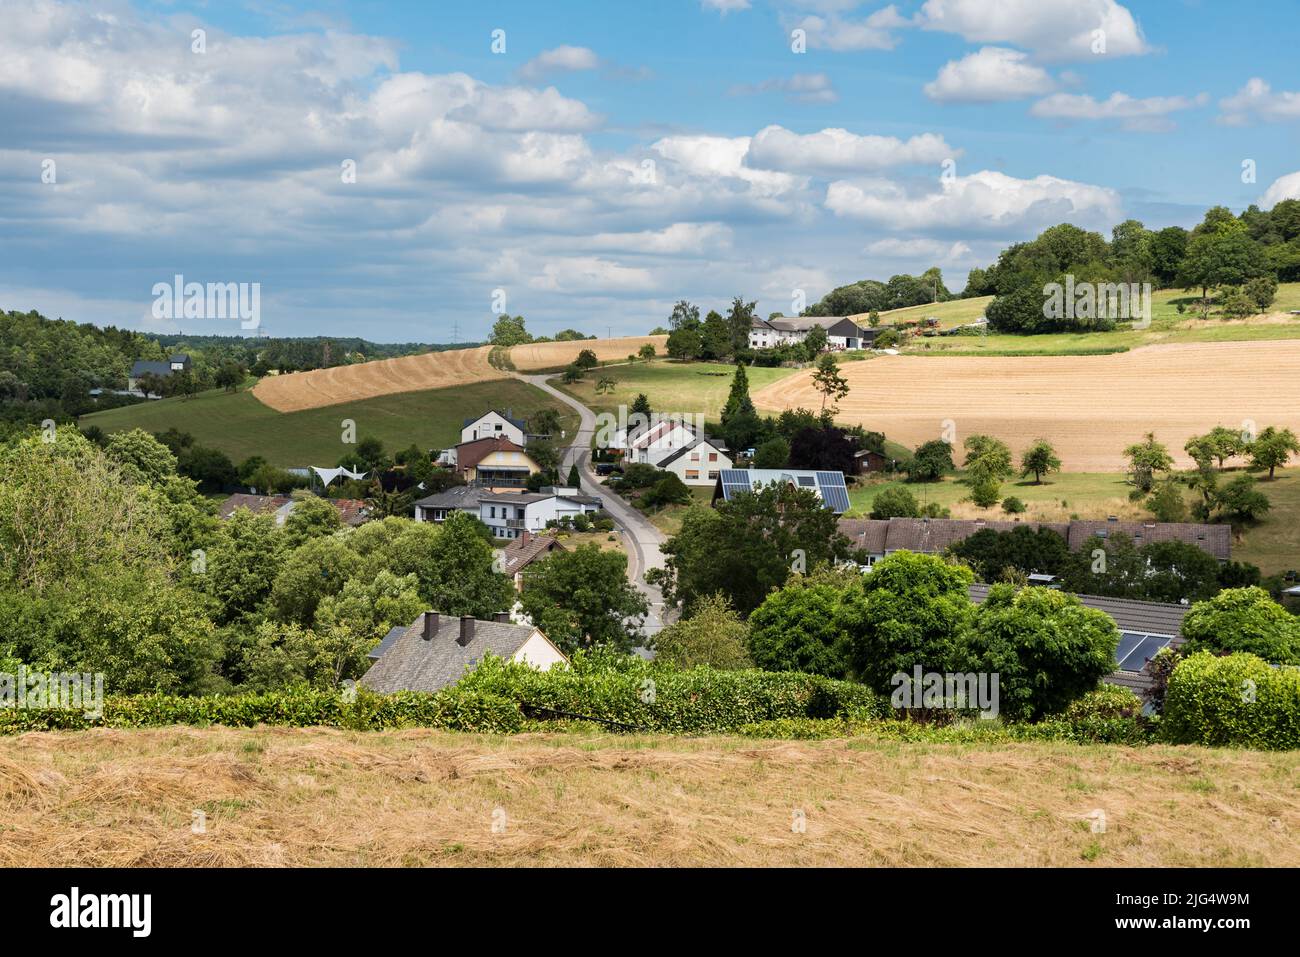 Welschbillig, Rhineland-Palatinate- Germany - 08 08 2020 View over the village, taken from the hills in summer Stock Photo